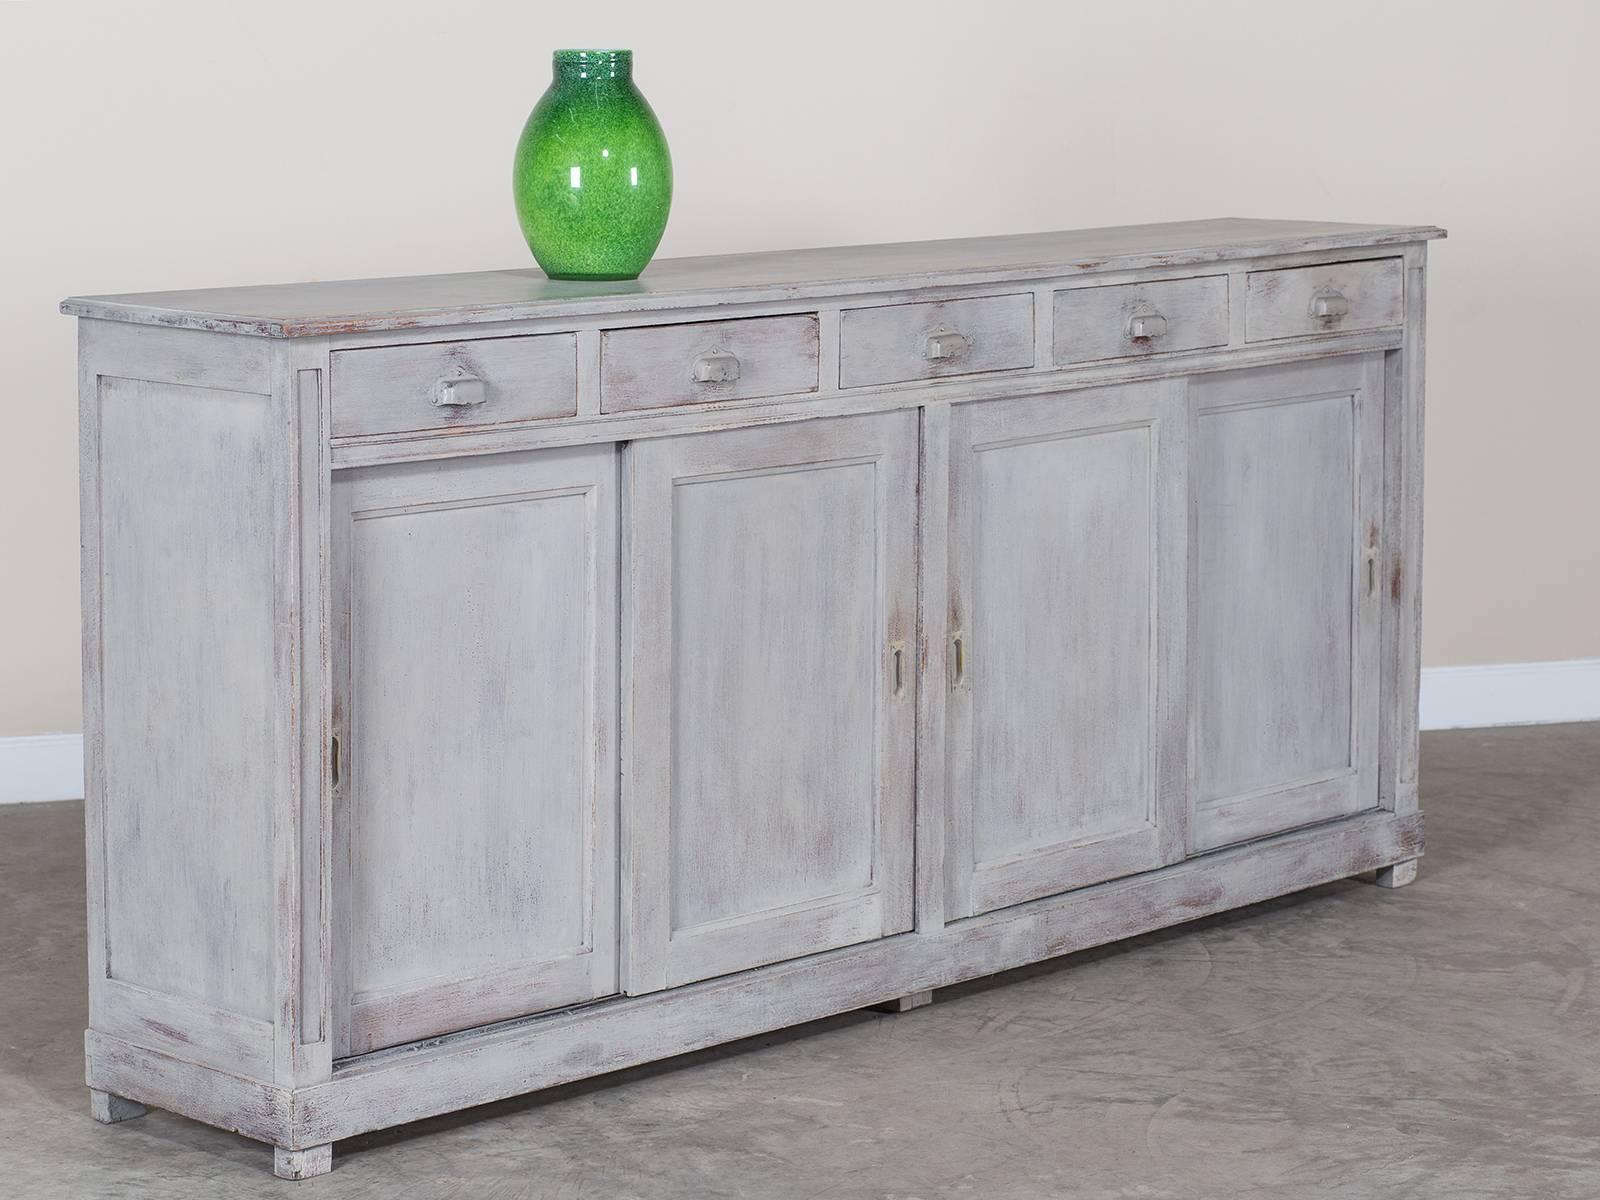 Receive our new selections direct from 1stdibs by email each week. Please click Follow Dealer below and see them first!

The clean and classic lines seen in this antique French shop counter, circa 1890 are quite desirable for today's interiors.